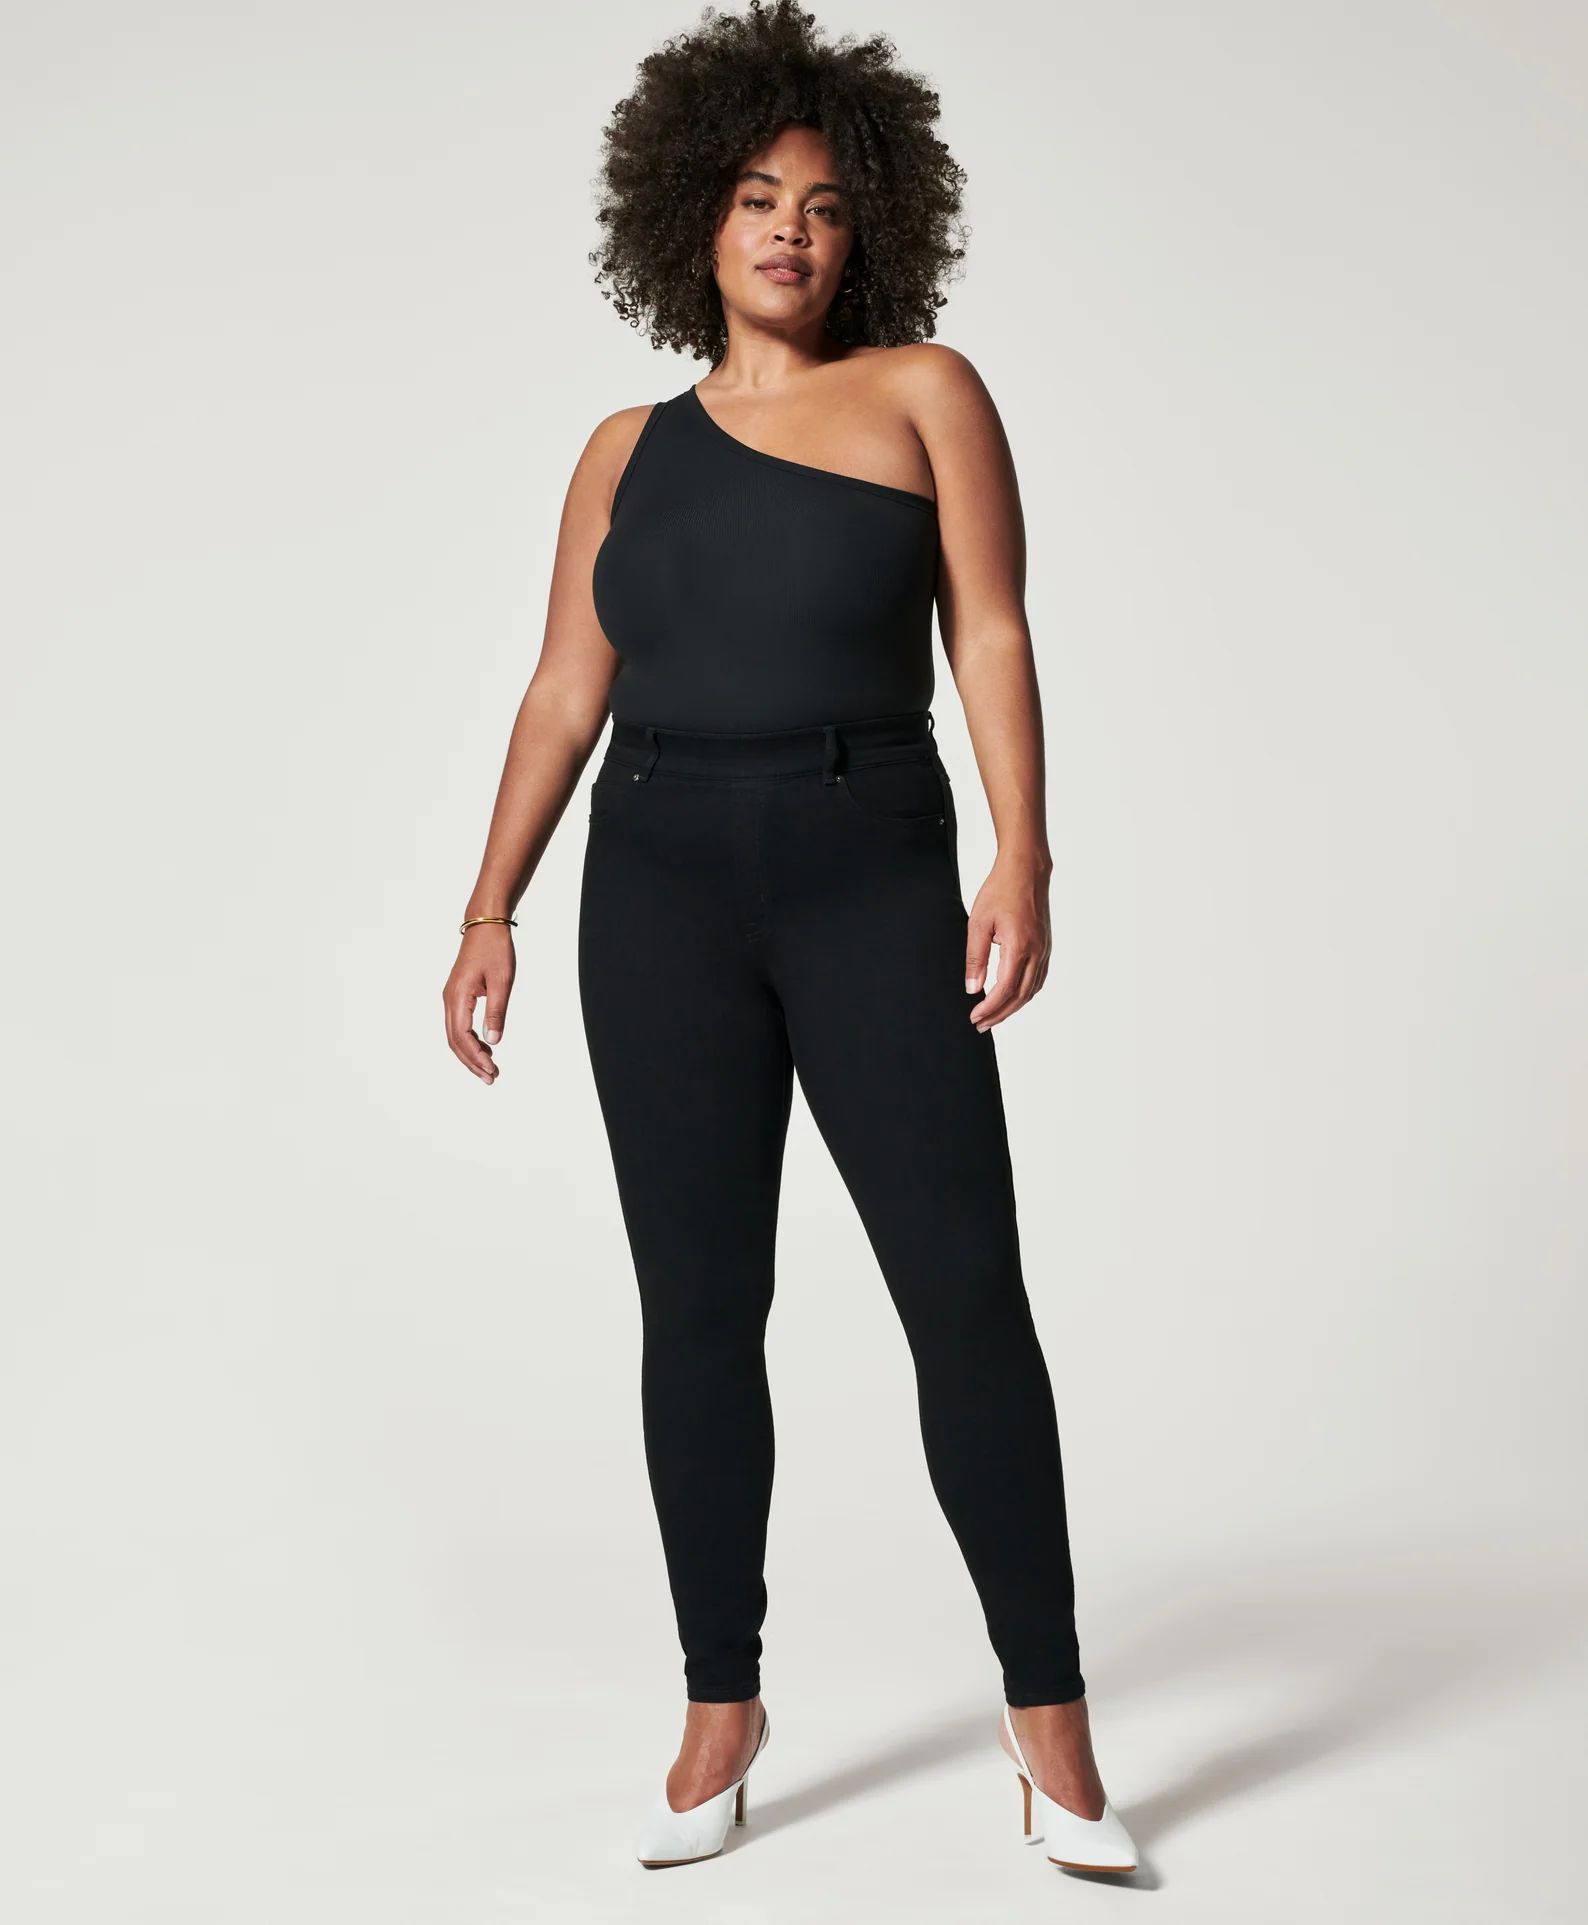 Suit Yourself Ribbed One Shoulder Bodysuit | Spanx